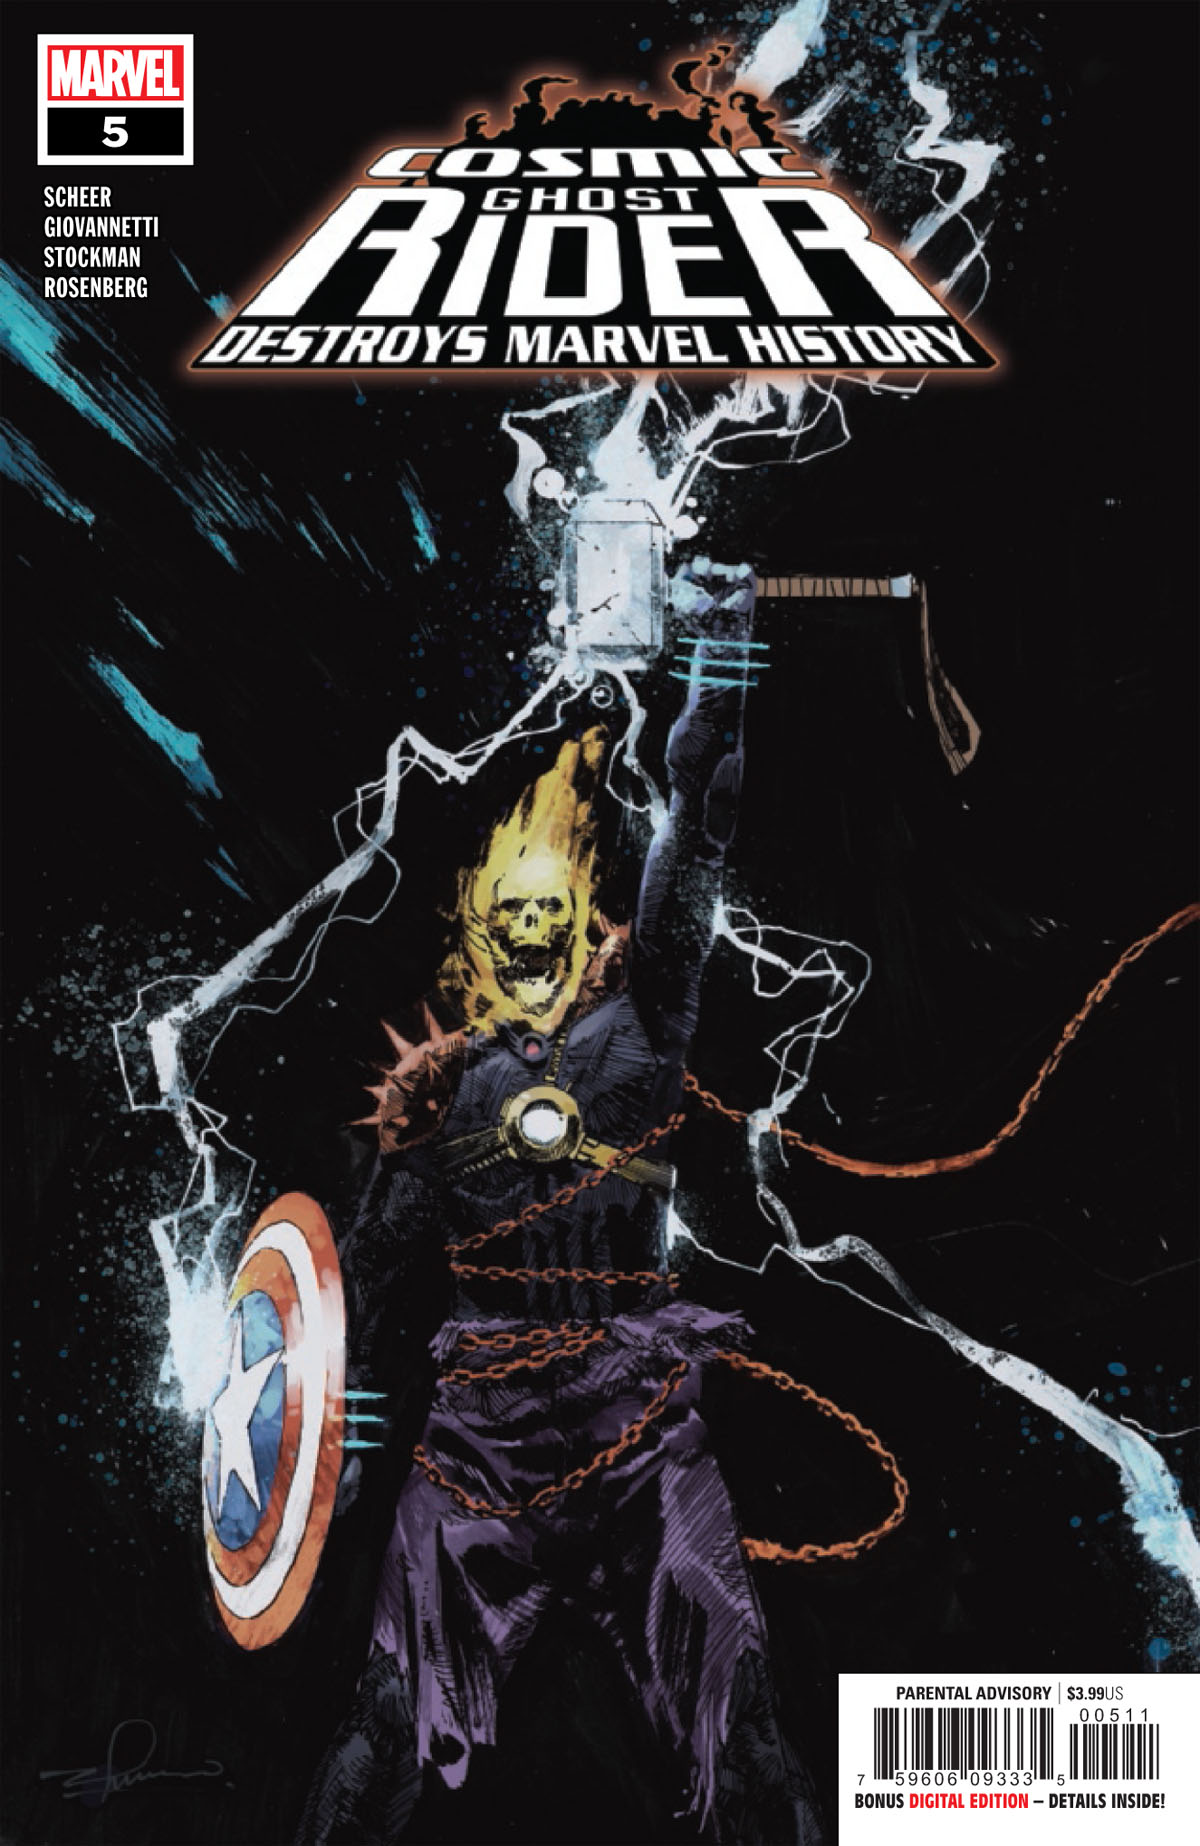 Cosmic Ghost Rider Destroys Marvel History #5 cover